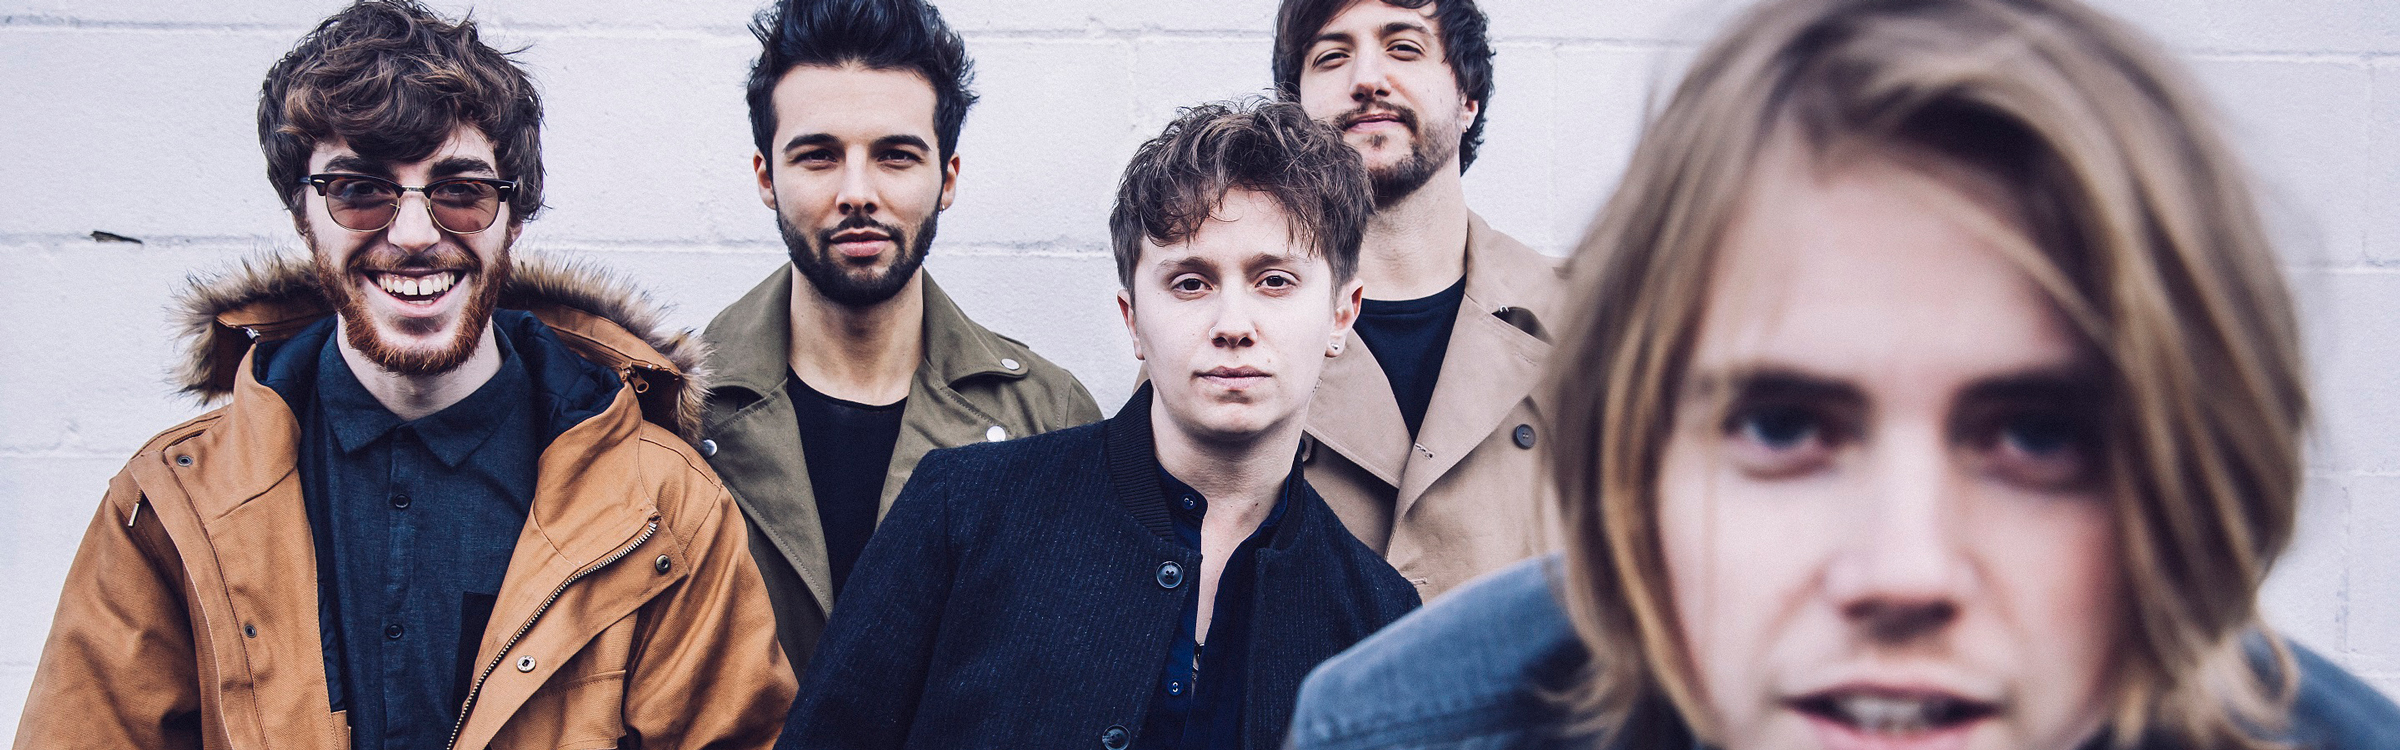 Nothingbutthieves header